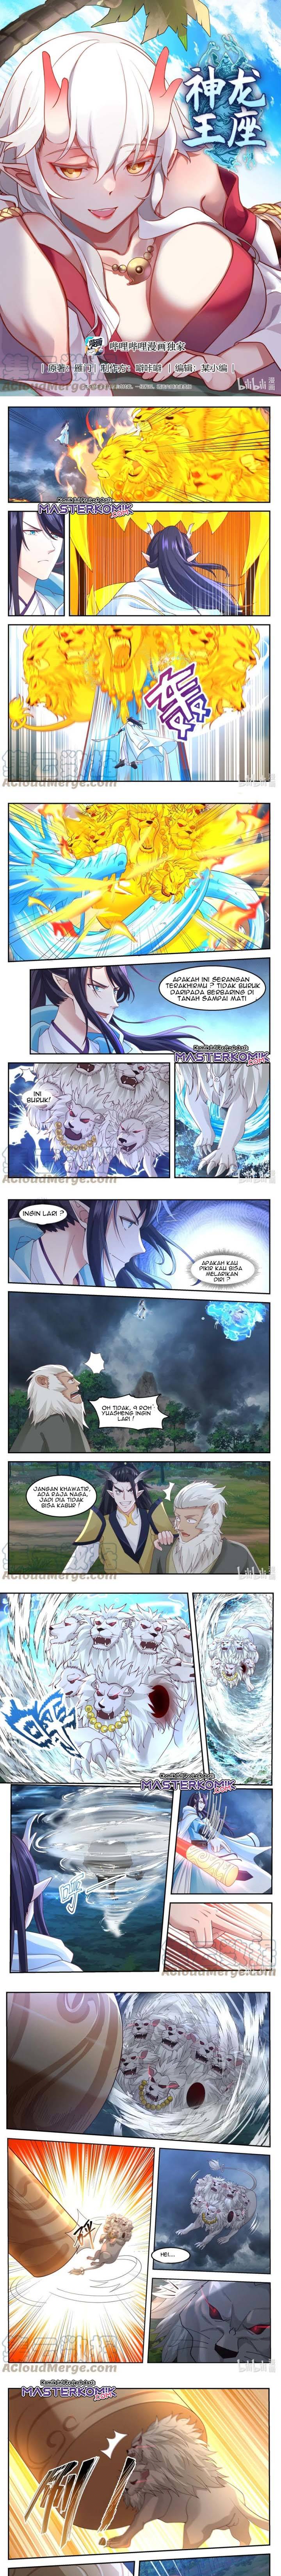 Dragon Throne Chapter 120 2